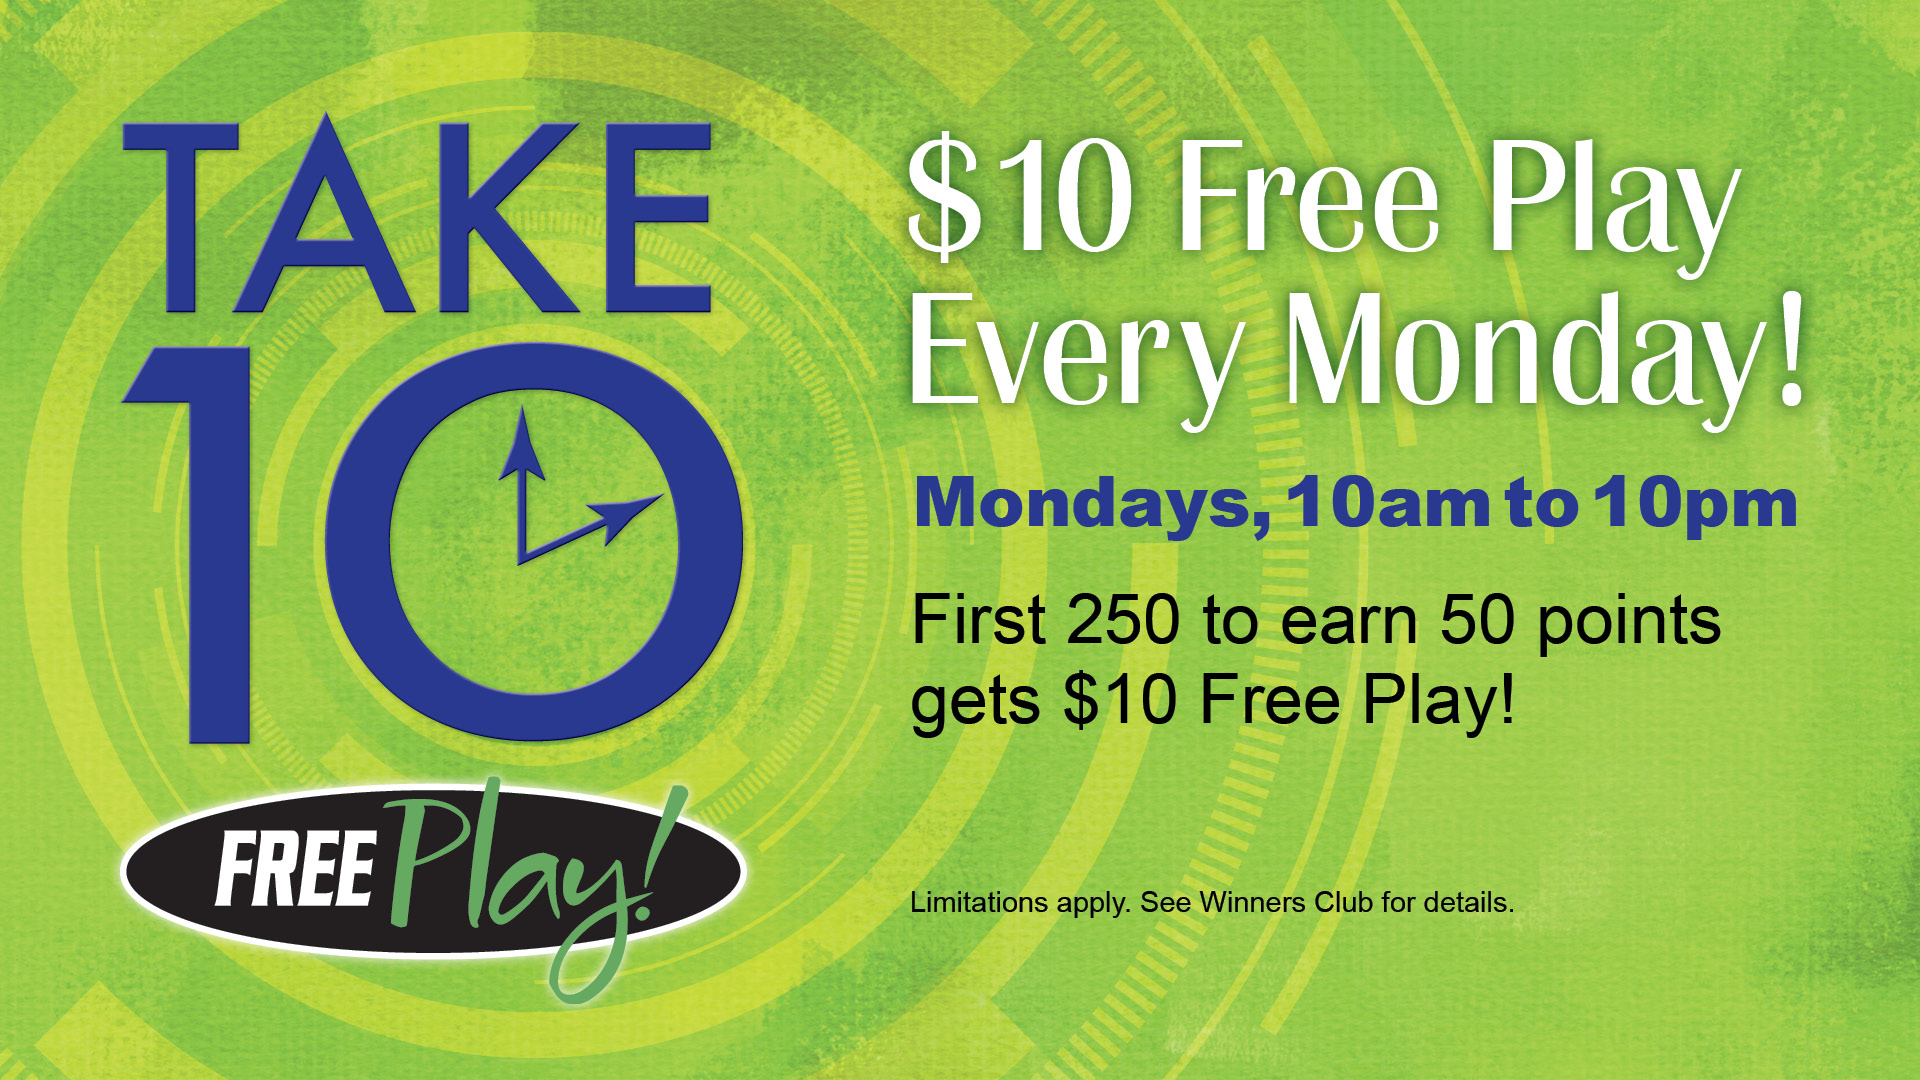 Take 10 free play: $10 Free Play Every Monday! Mondays, 10am to 10pm. First 250 to earn 50 points gets $10 Free Play! Limitations apply. See Winners Club for details.